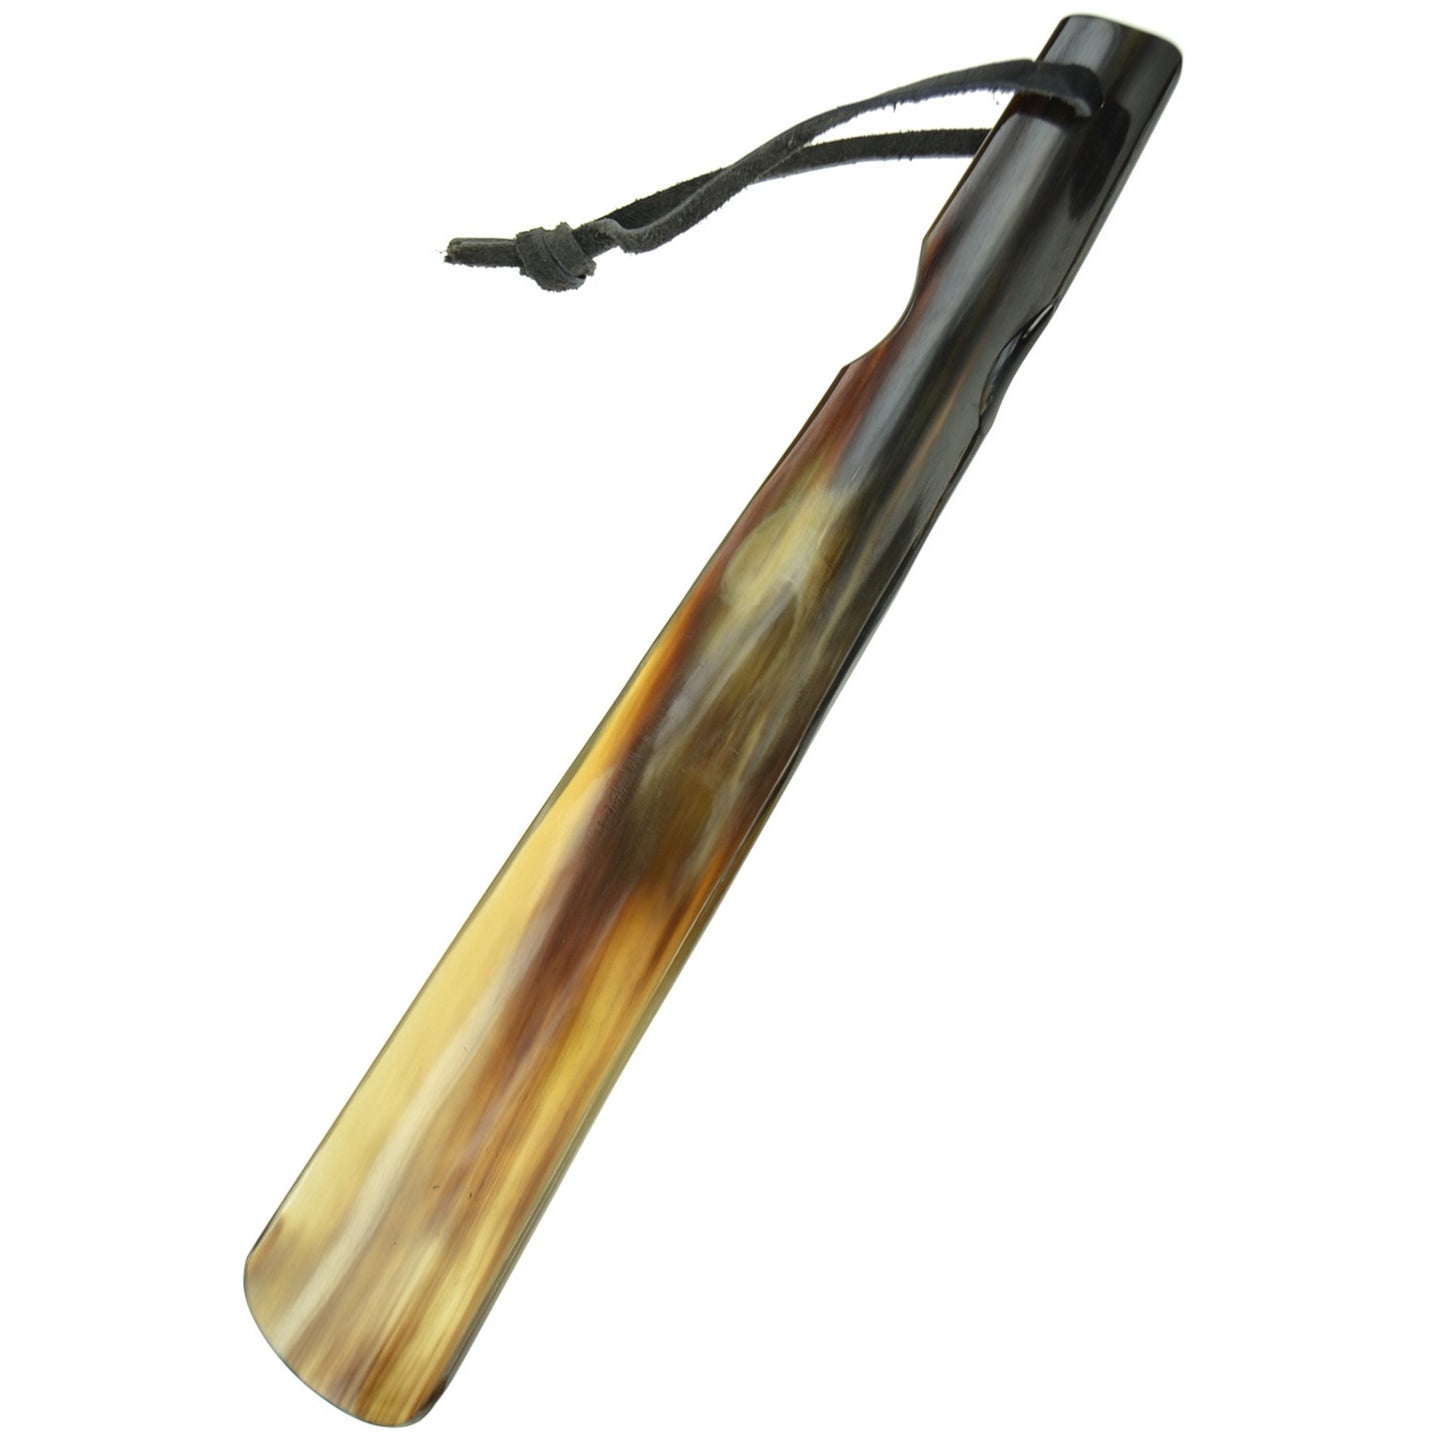 12" (30cm) long - Flat Handcrafted Real Horn Shoe Horn